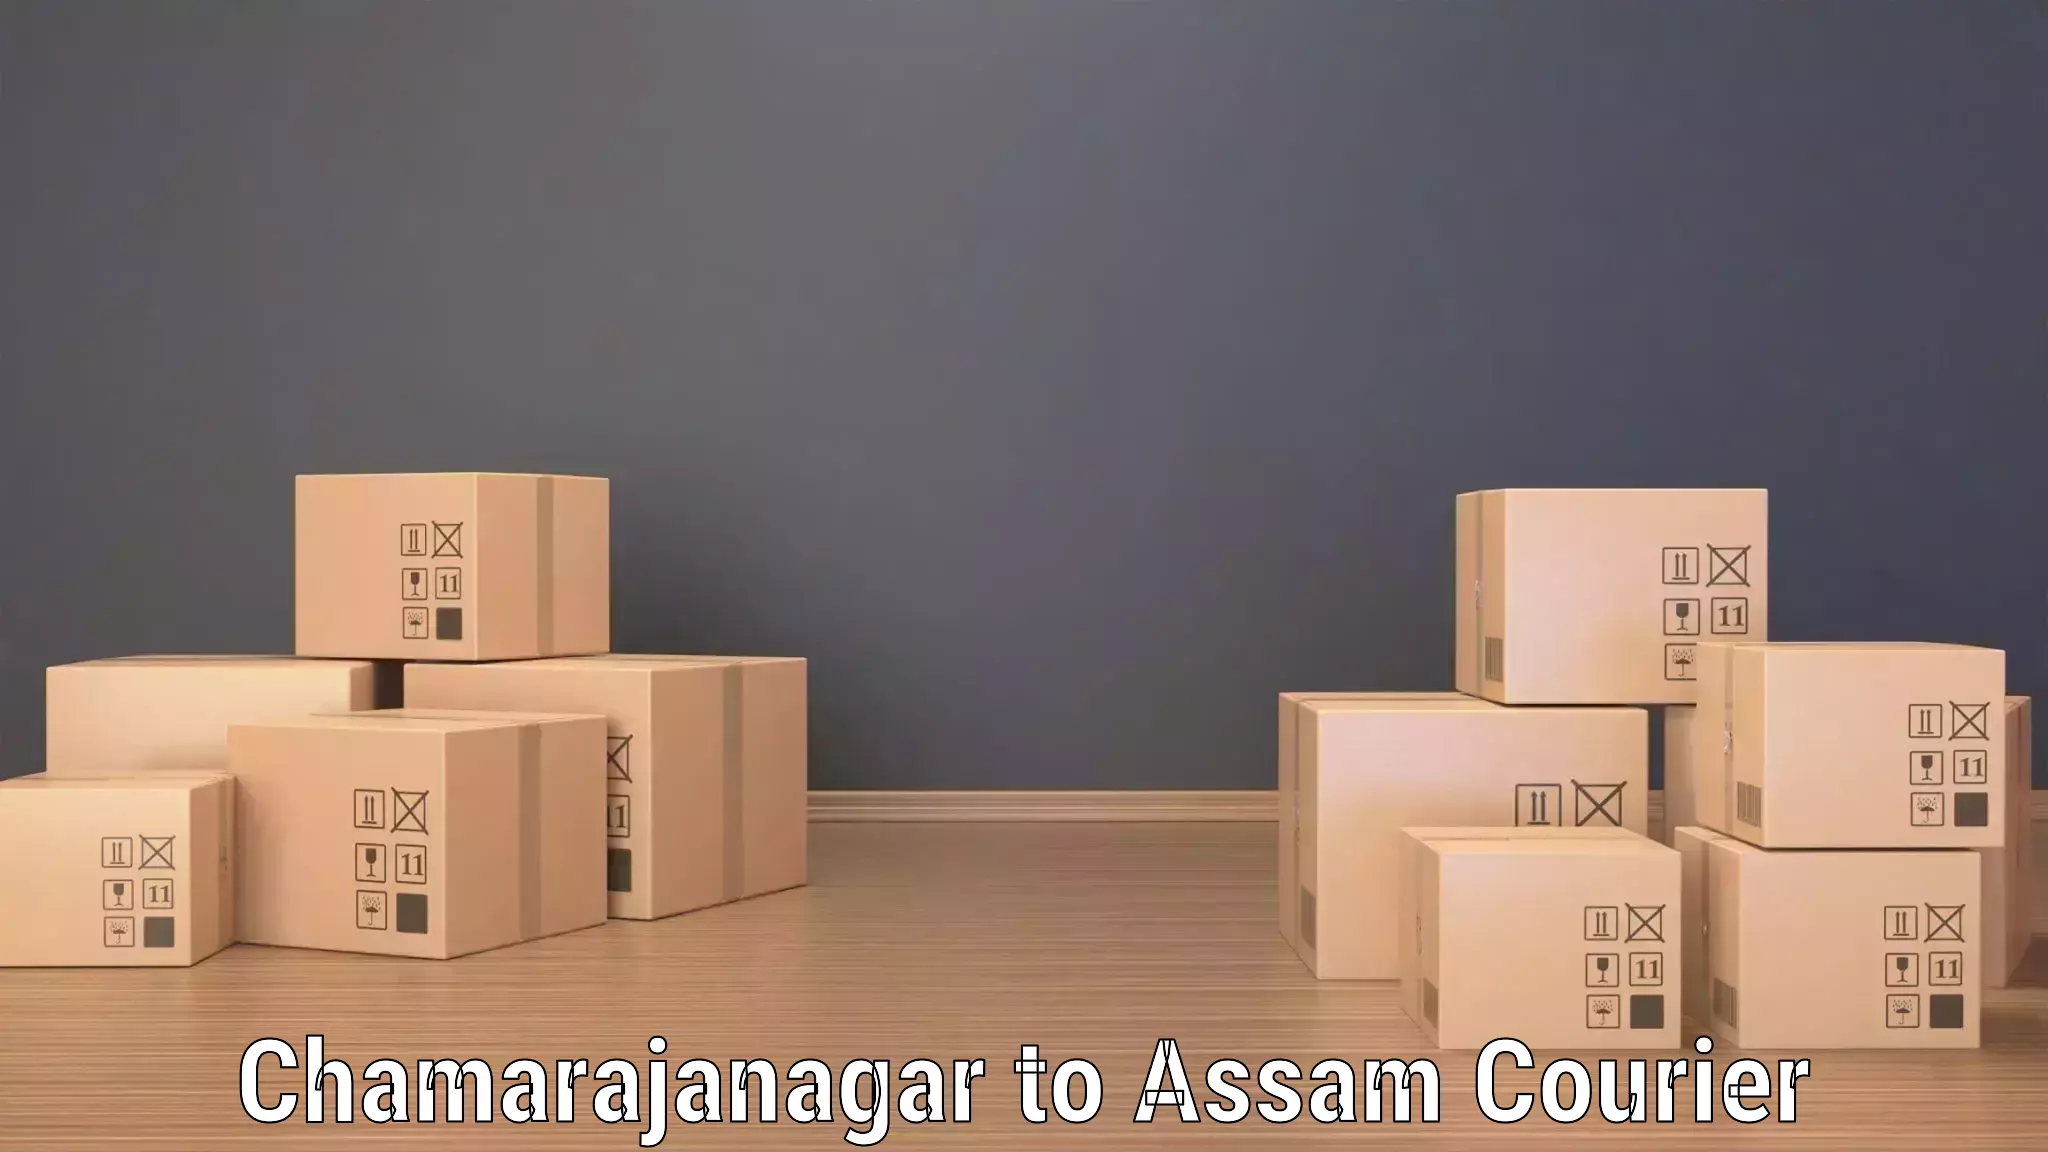 Reliable package handling in Chamarajanagar to Lala Assam